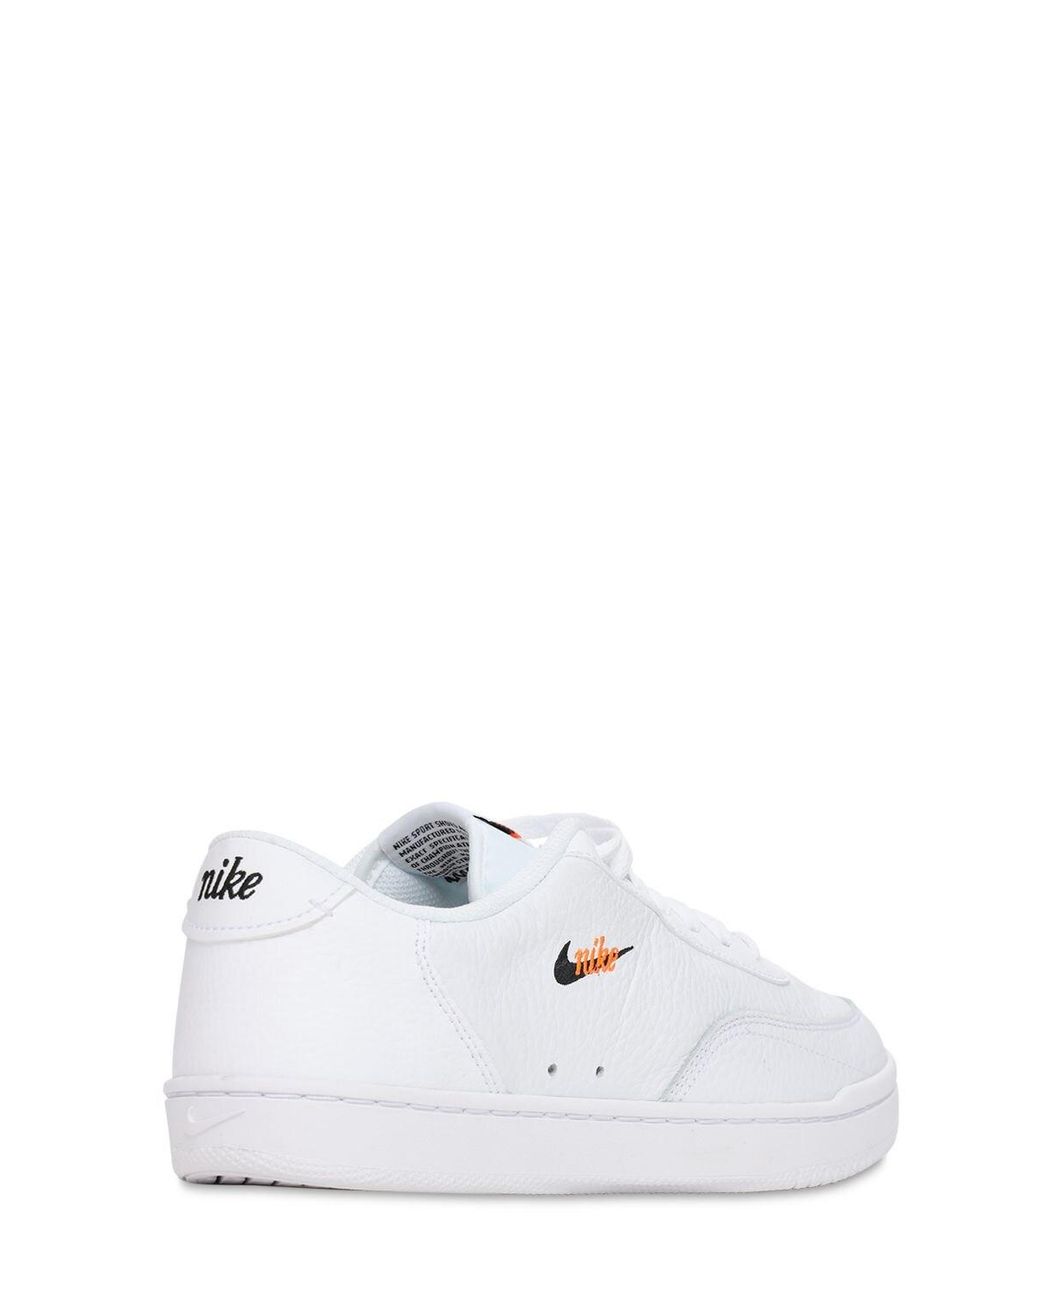 Nike Leather Court Vintage Premium in White - Save 38% - Lyst